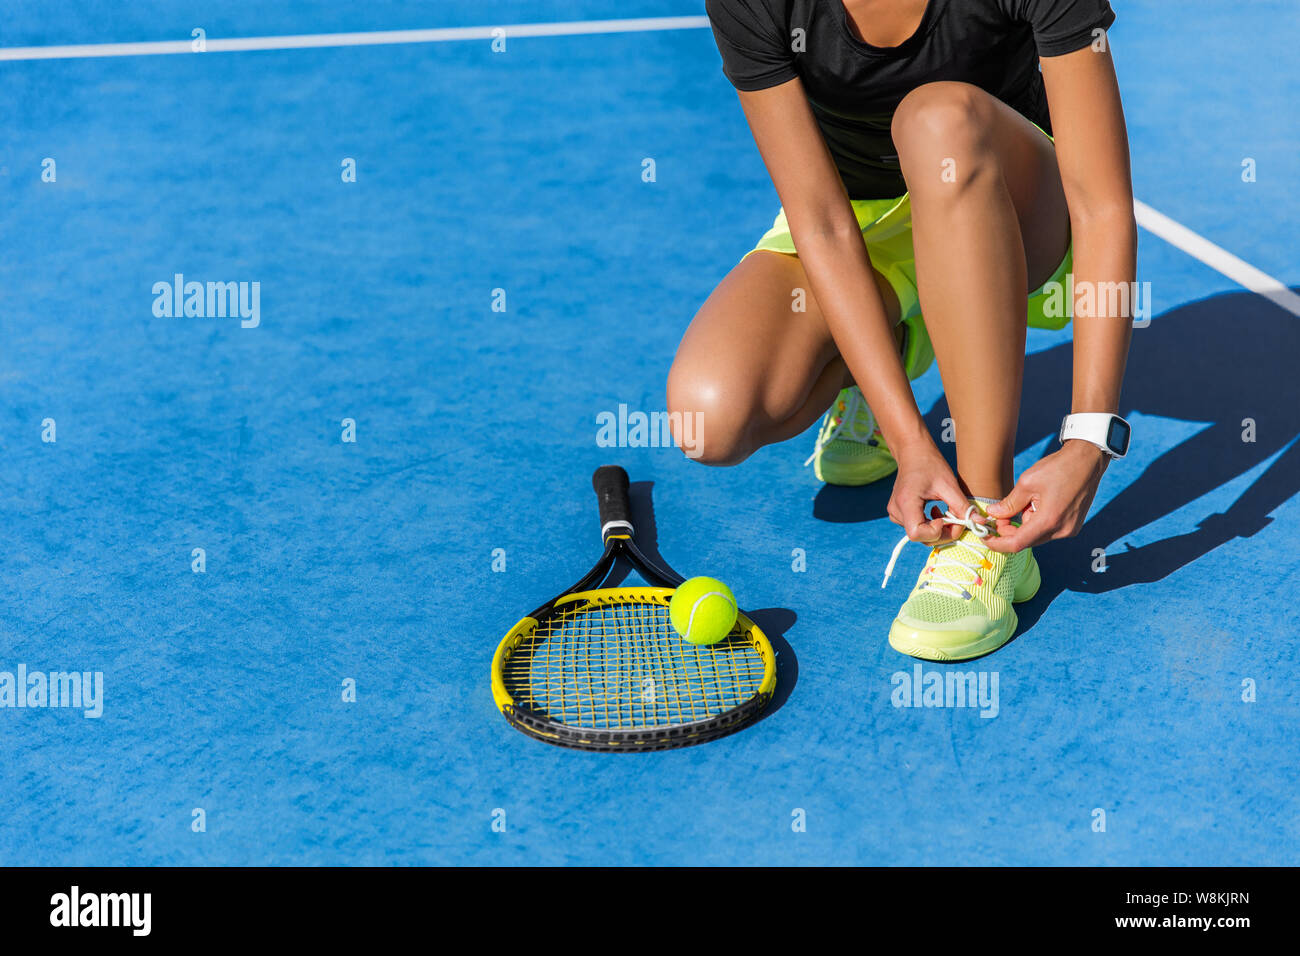 Sports woman athlete getting ready for playing a game of tennis tying laces of her running shoes lacing the shoelaces on outdoor blue hardcourt in summer. Professional player preparing for tournament. Stock Photo